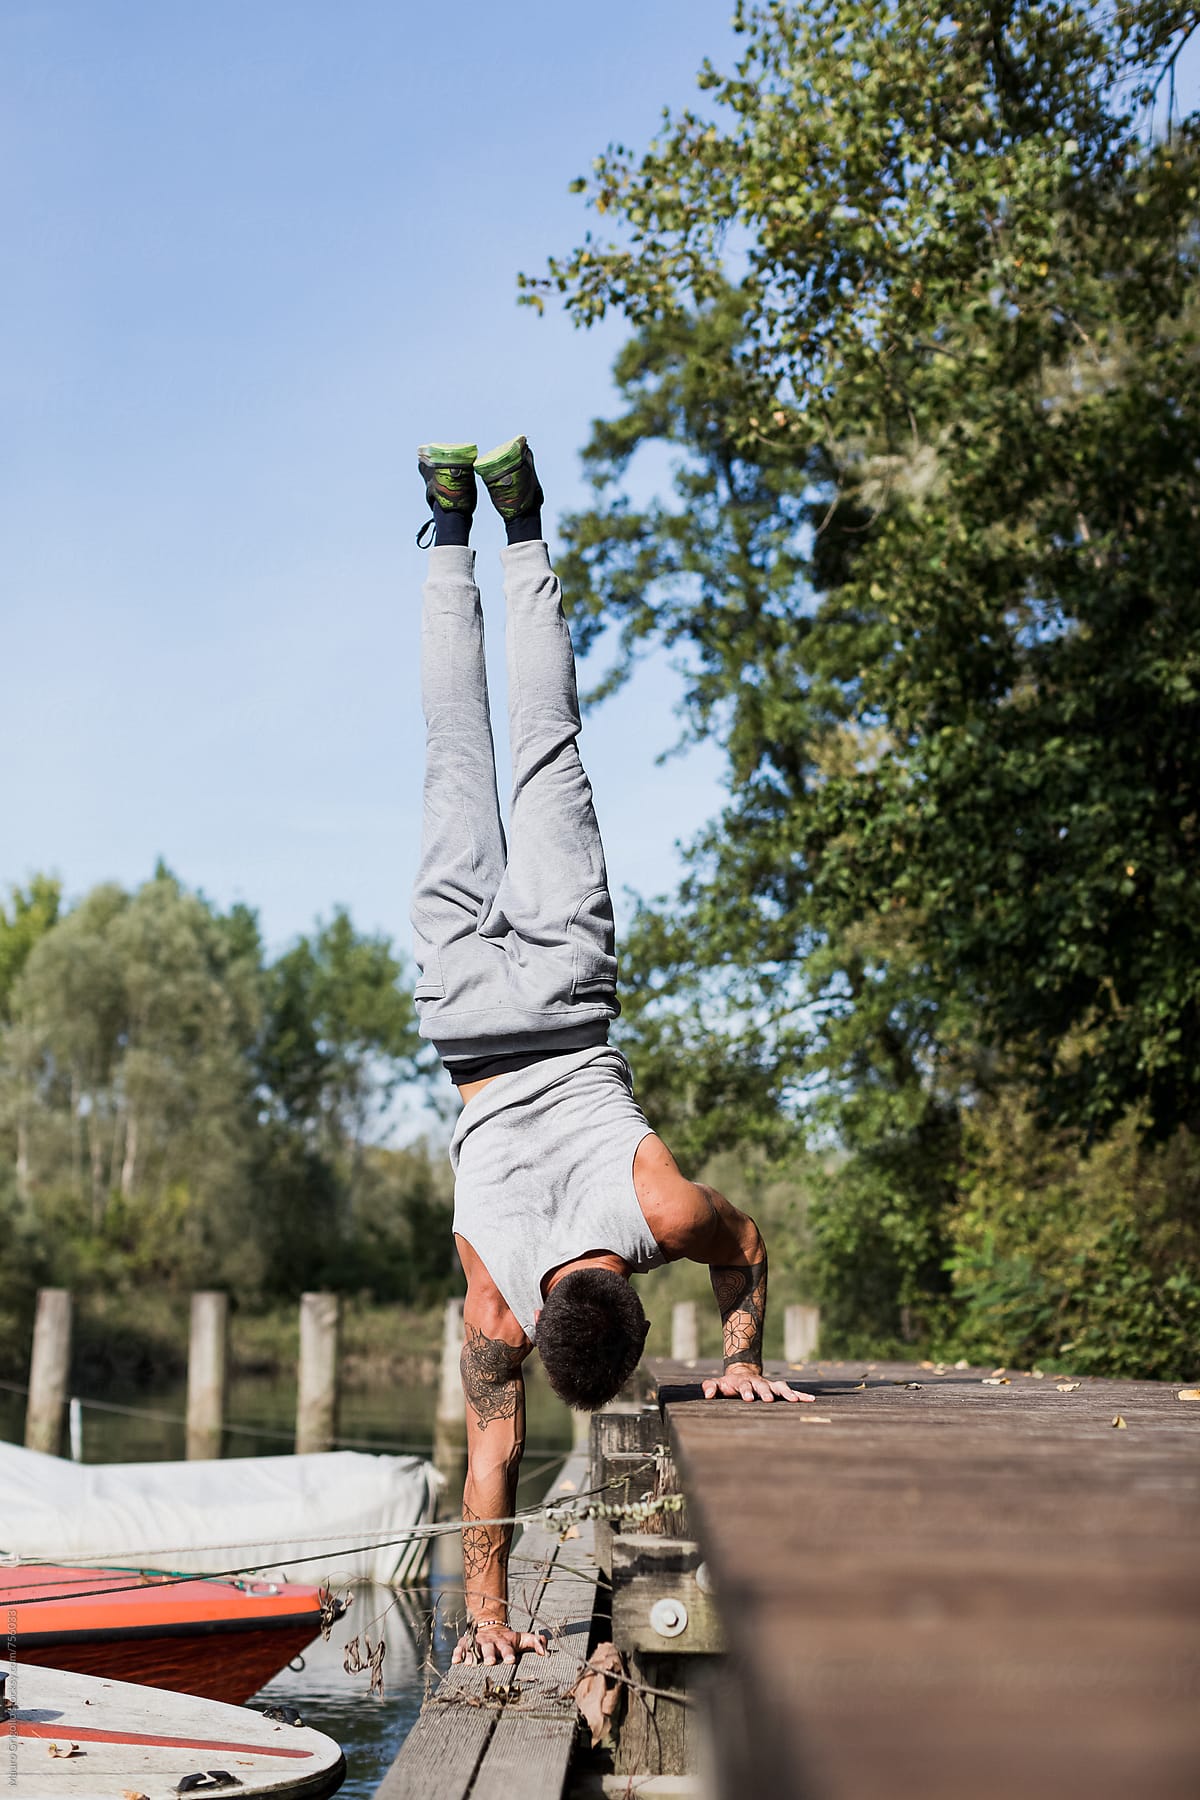 Acrobat doing Handstand pose in a jetty